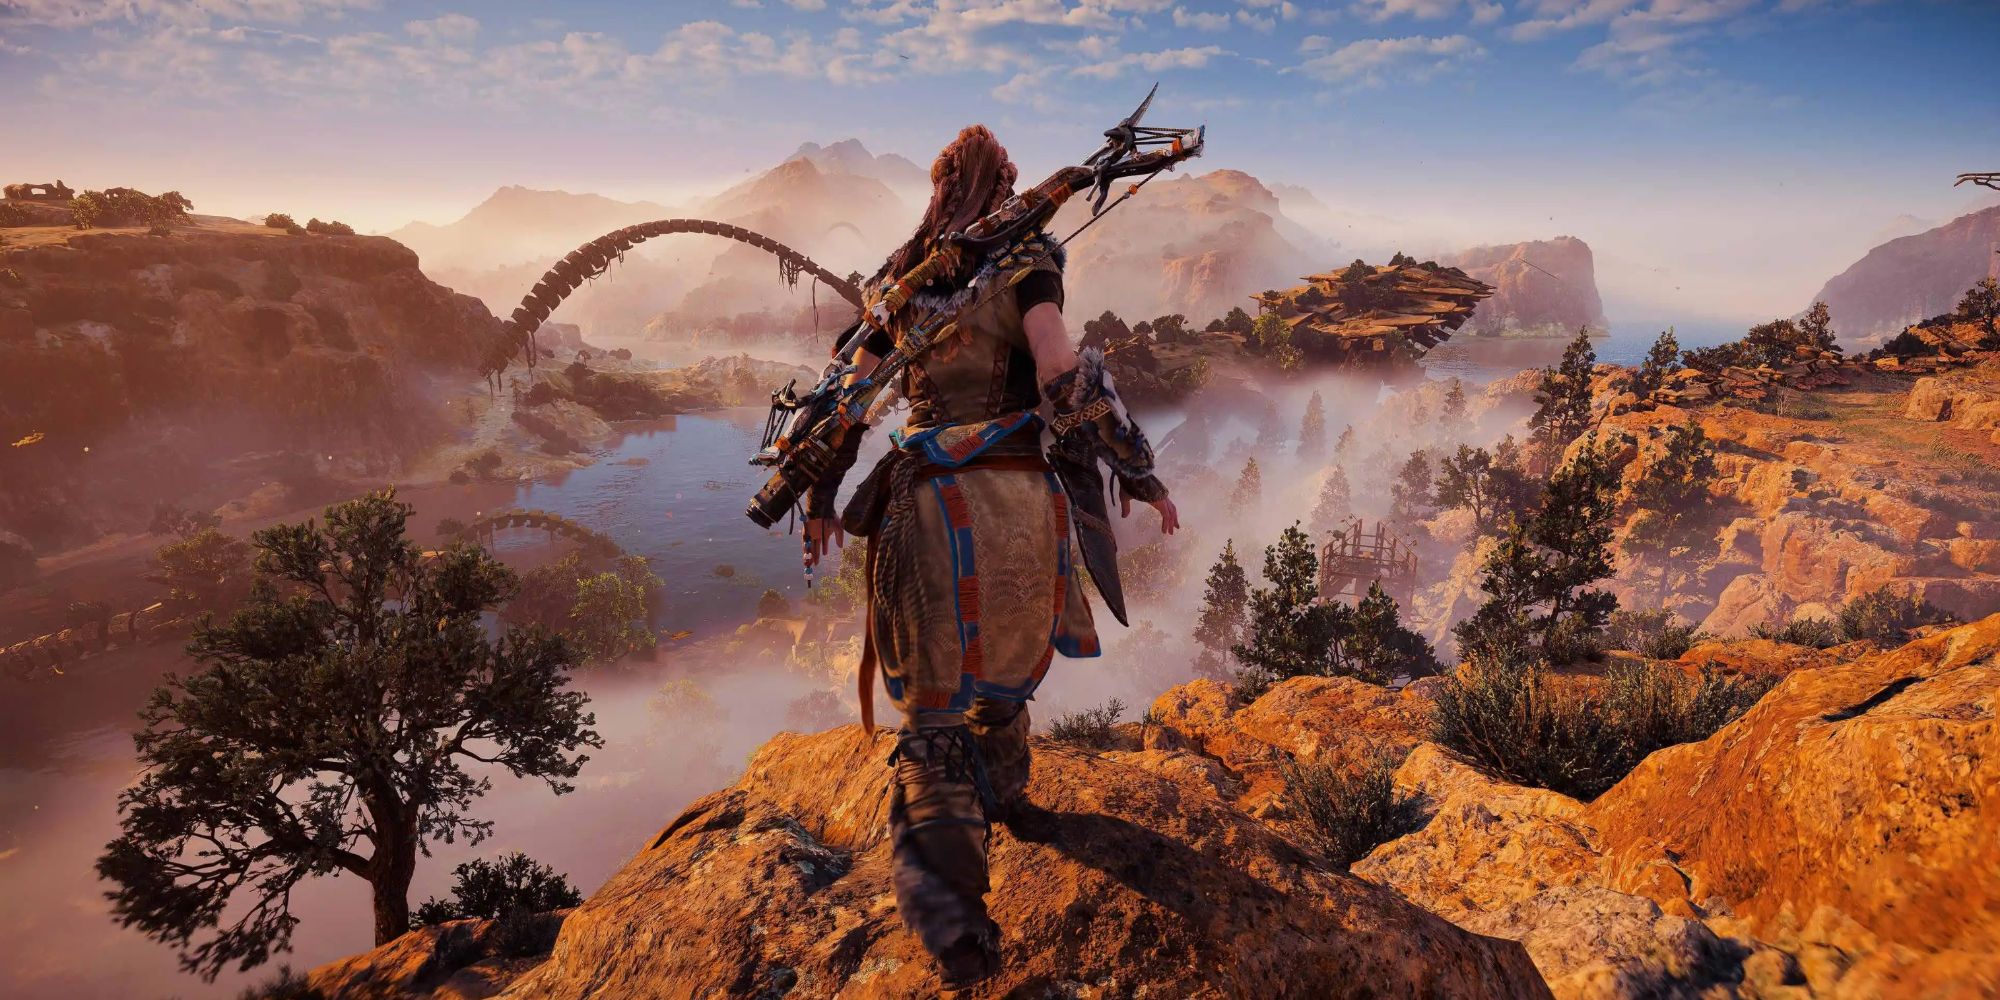 Aloy looking out at a gorgeous view from the top of a cliff in Horizon Forbidden West